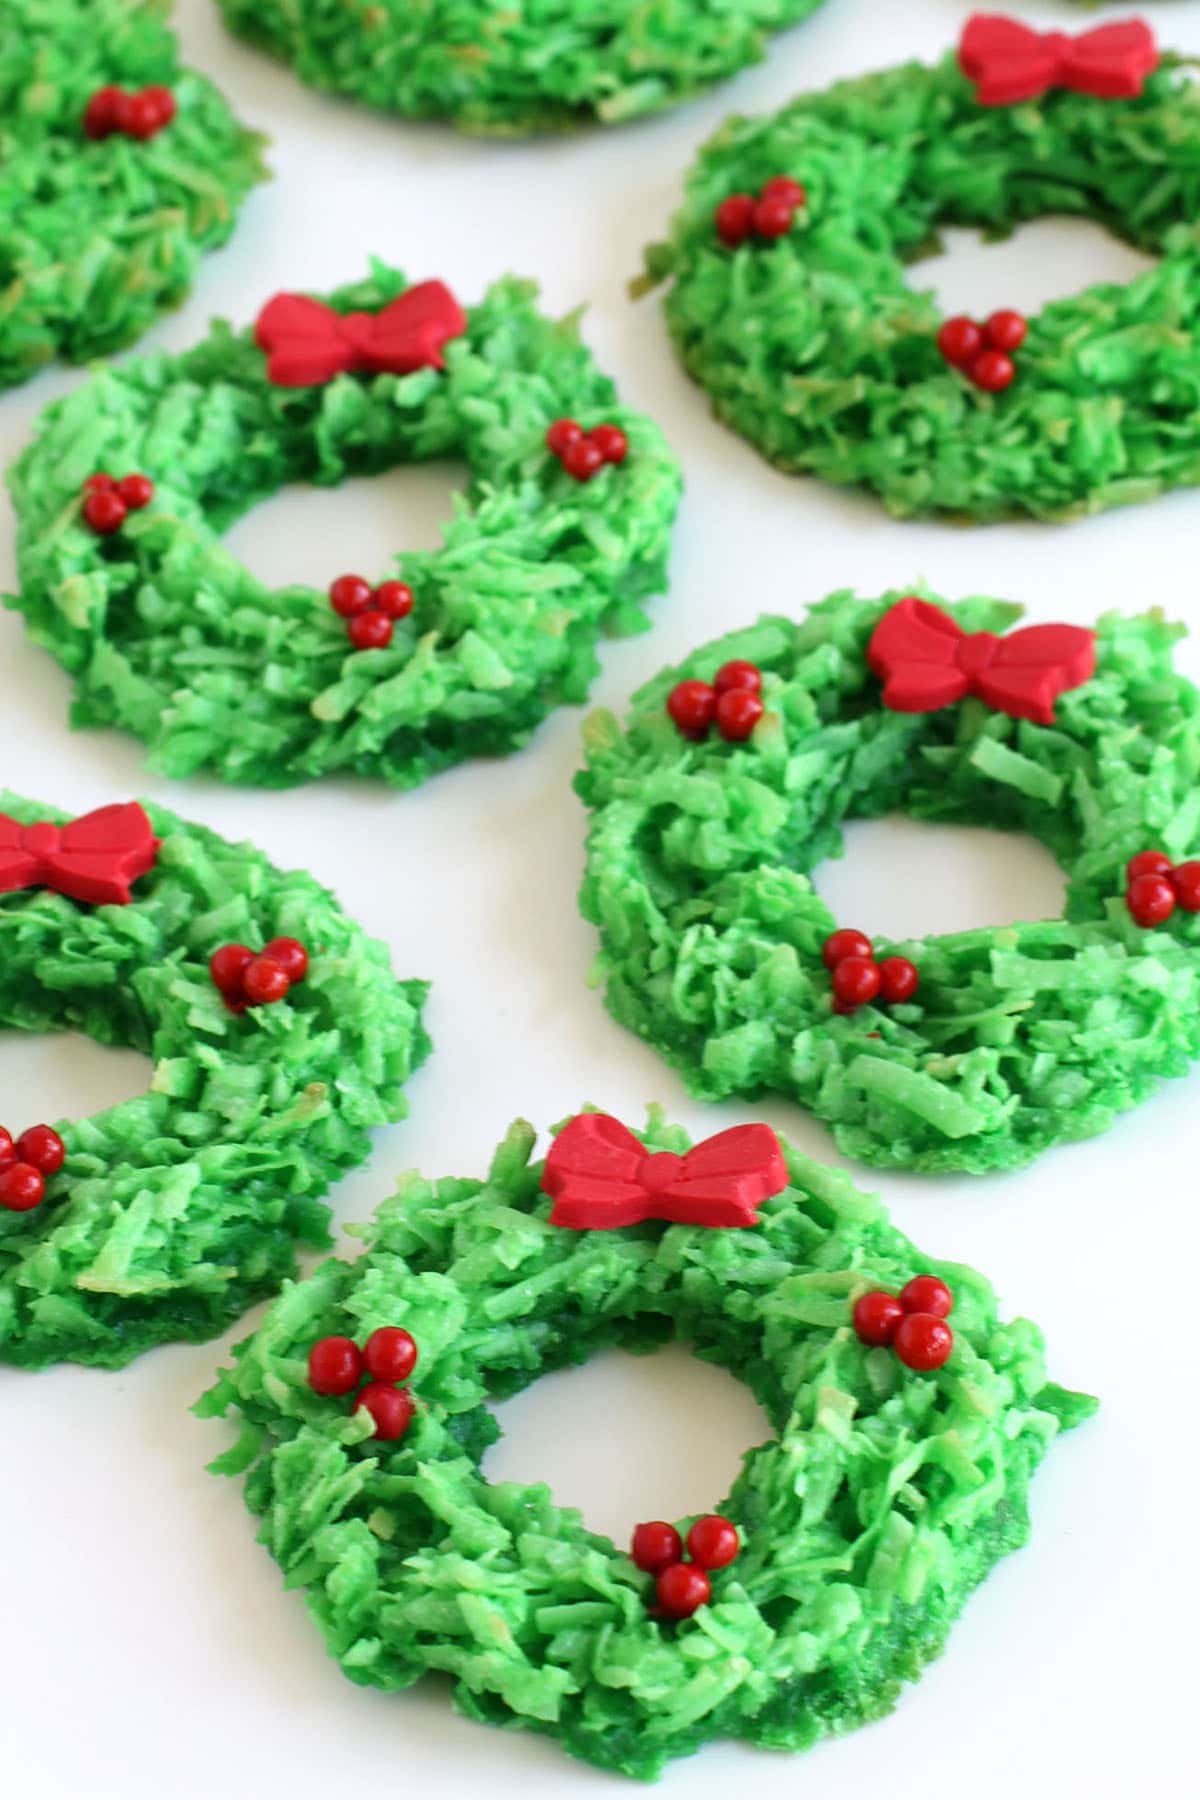 Coconut Macaroon Wreaths decorated with red sugar pearls and red modeling chocolate bows.